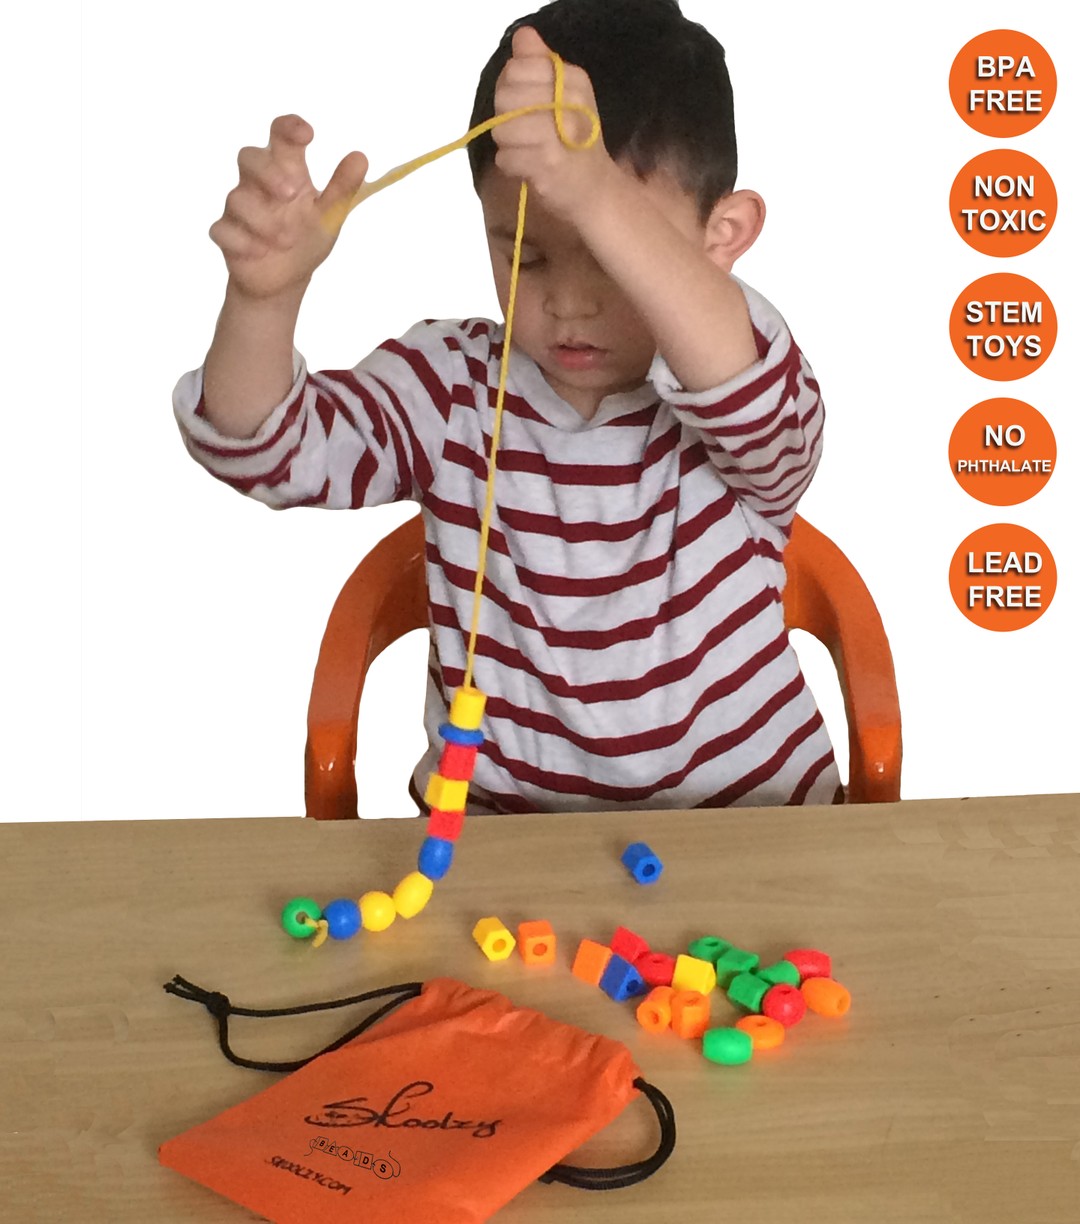 Details about  / Wooden Lacing Beads Threading Stringing Game Toy for Preschool Kids Toddlers